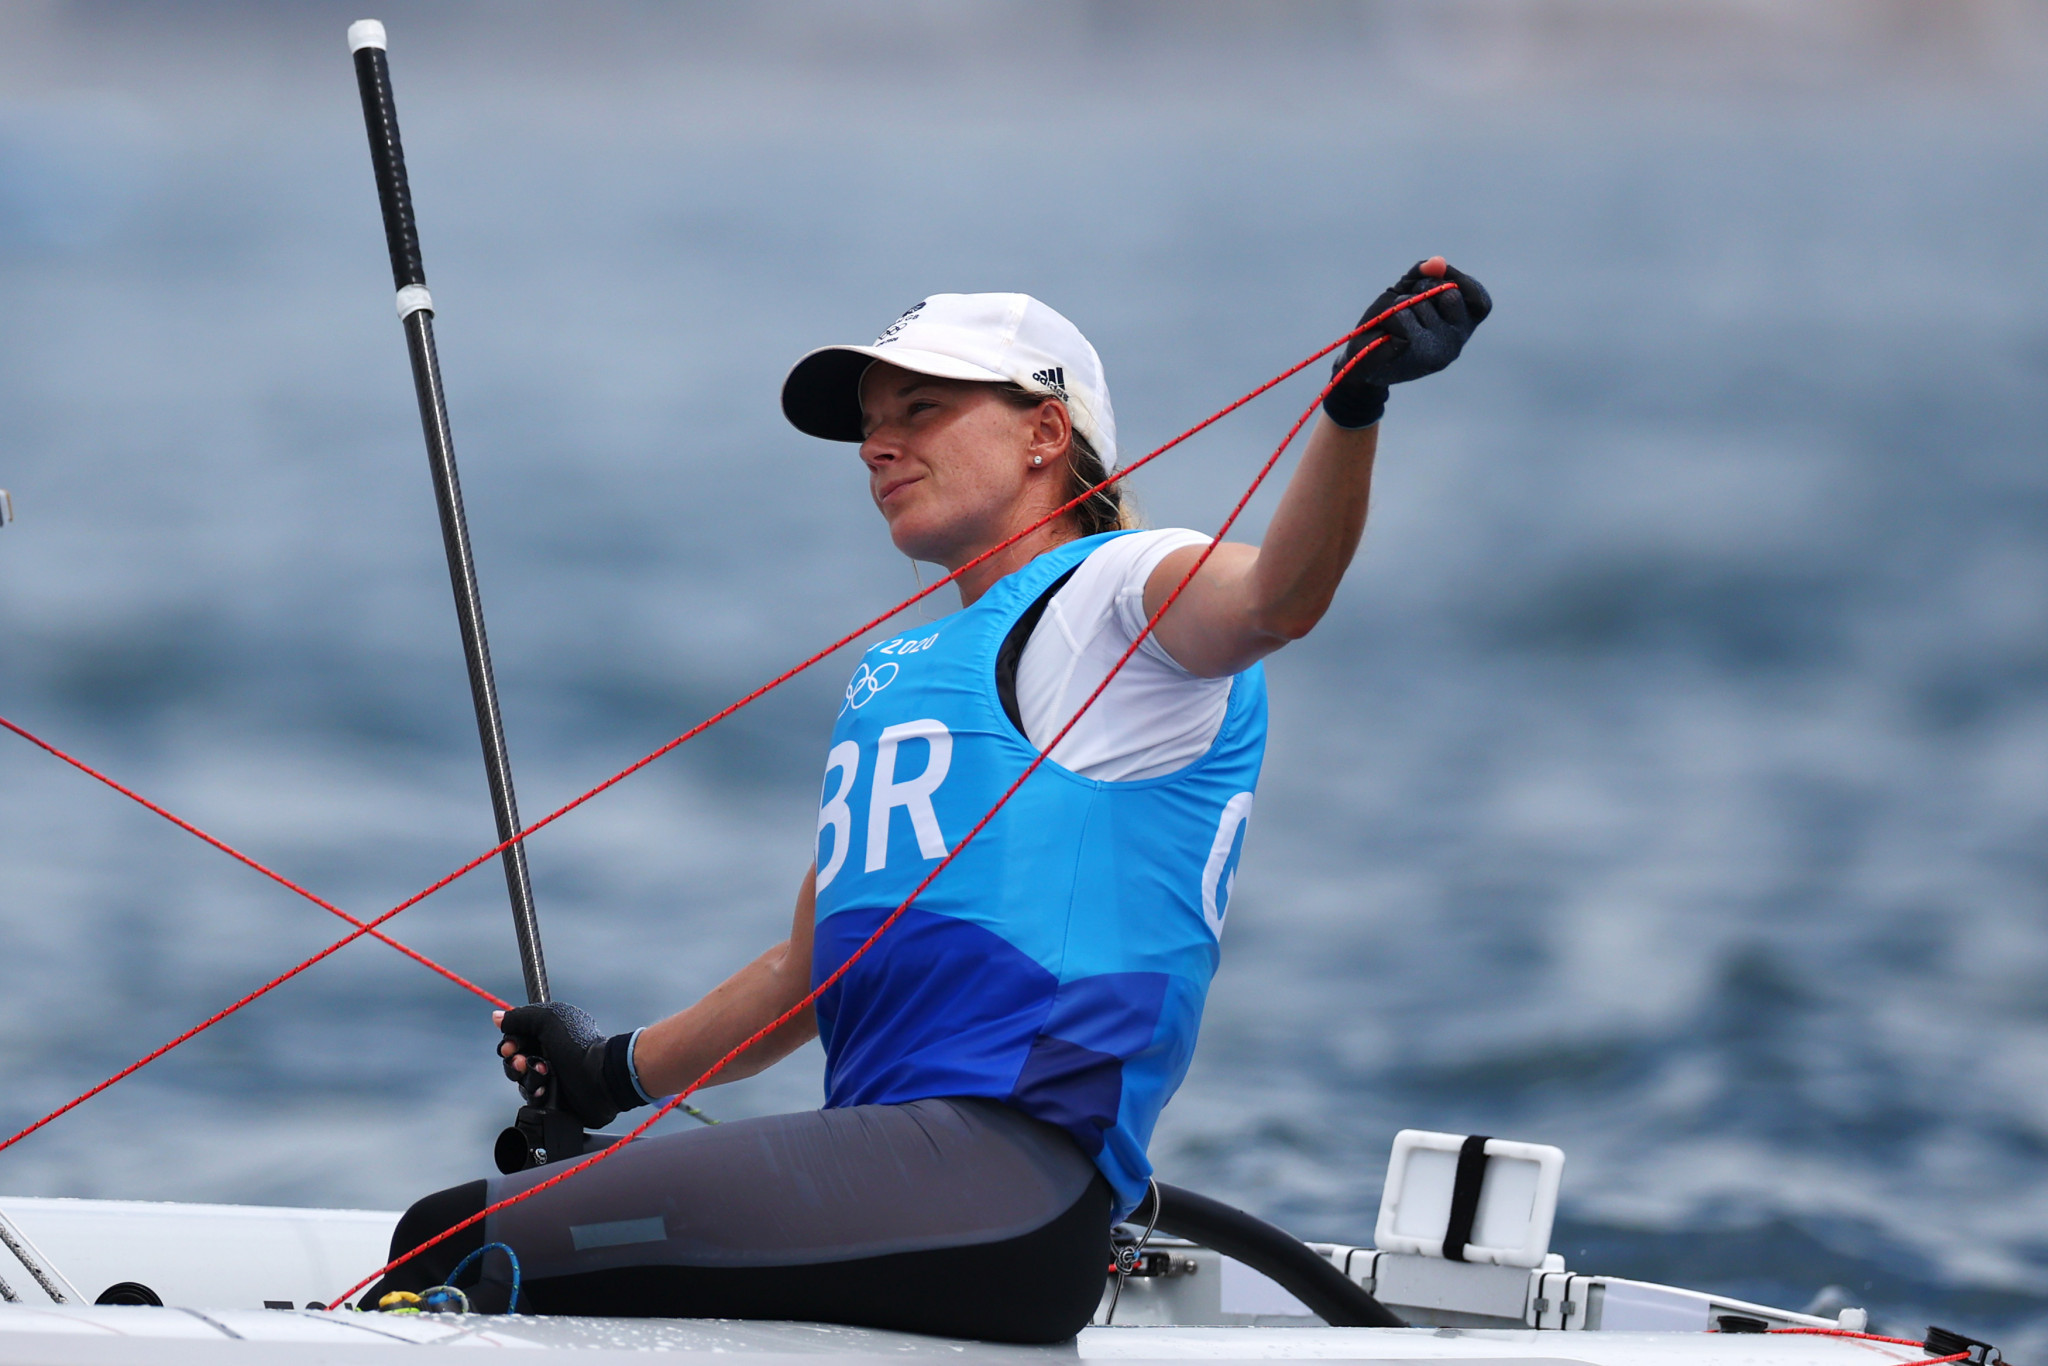 Sailor Hannah Mills has called for more athletes to speak out to influence Governments on climate change ©Getty Images